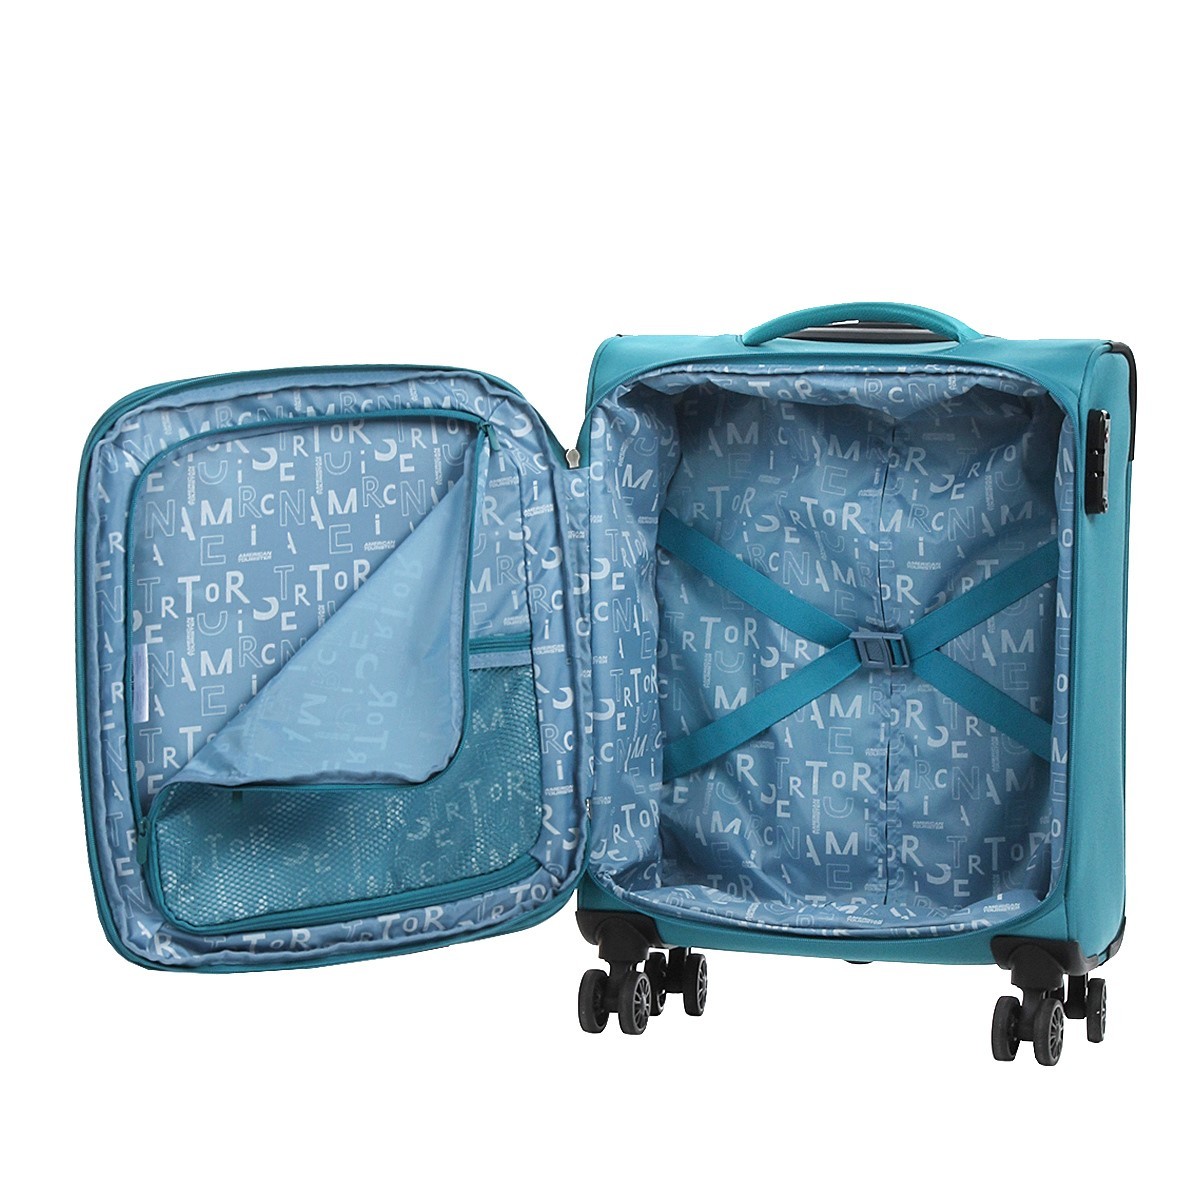 American tourister by samsonite Spinner cabina 4 ruote Stone teal Pulsonic MD6*21001